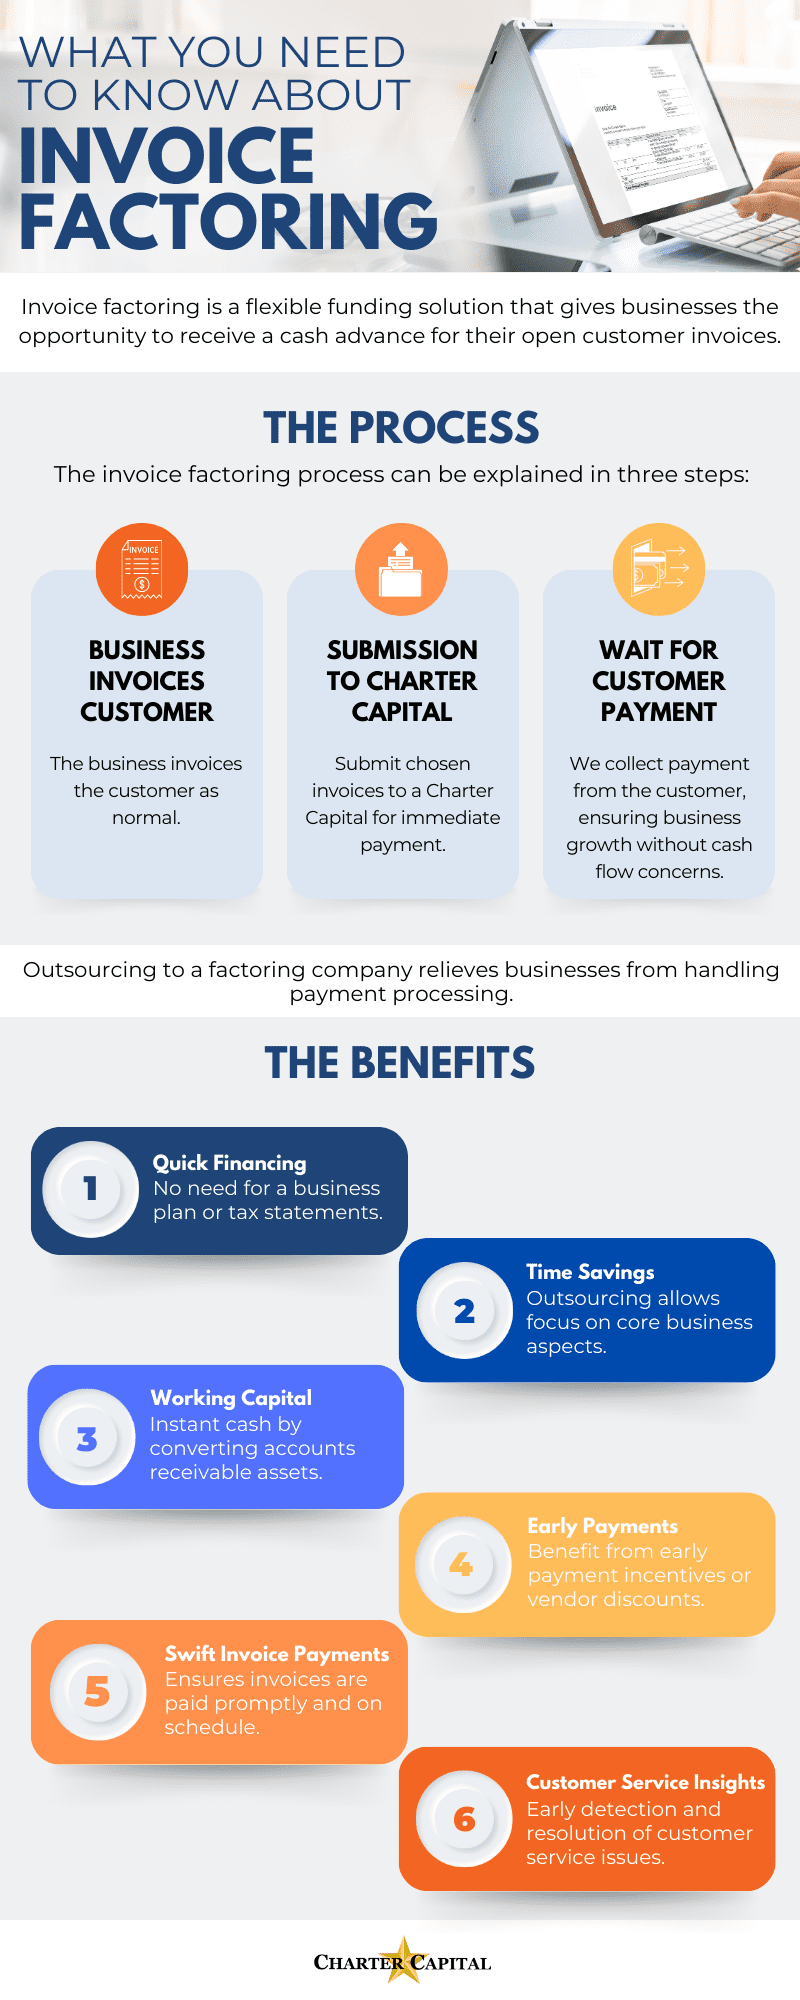 Invoice Factoring Infographic | How Does Invoice Factoring Work?